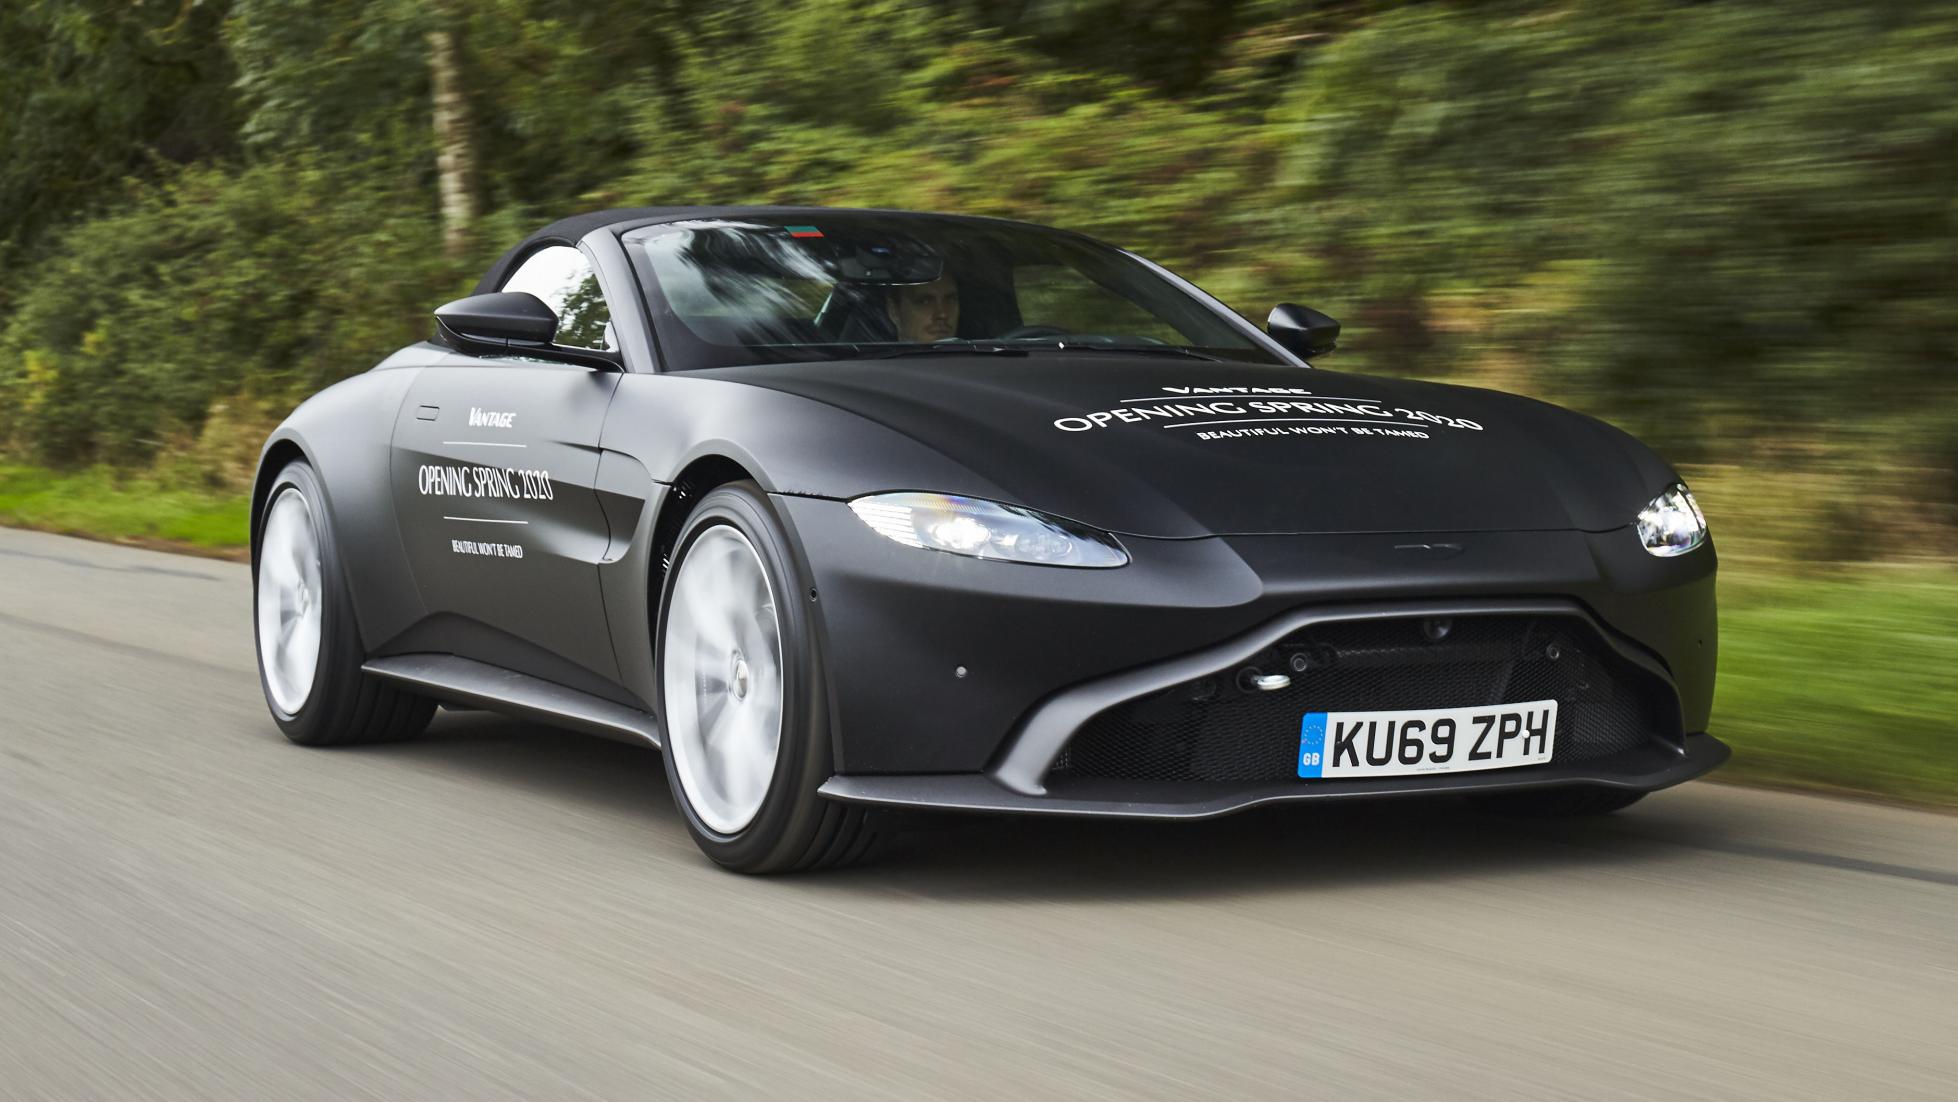 Here’s your first official look at the new Aston Vantage Roadster